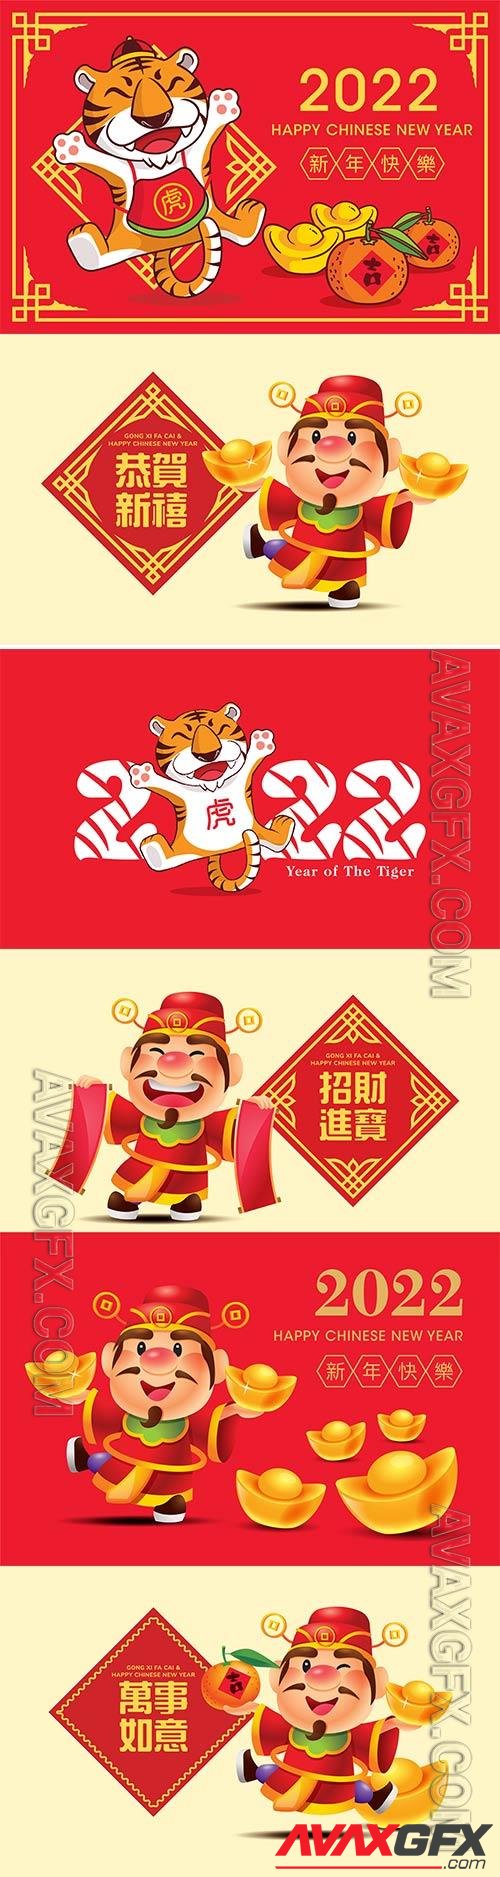 Empty space for chinese new year copy with god of wealth holds chinese scroll greeting vector